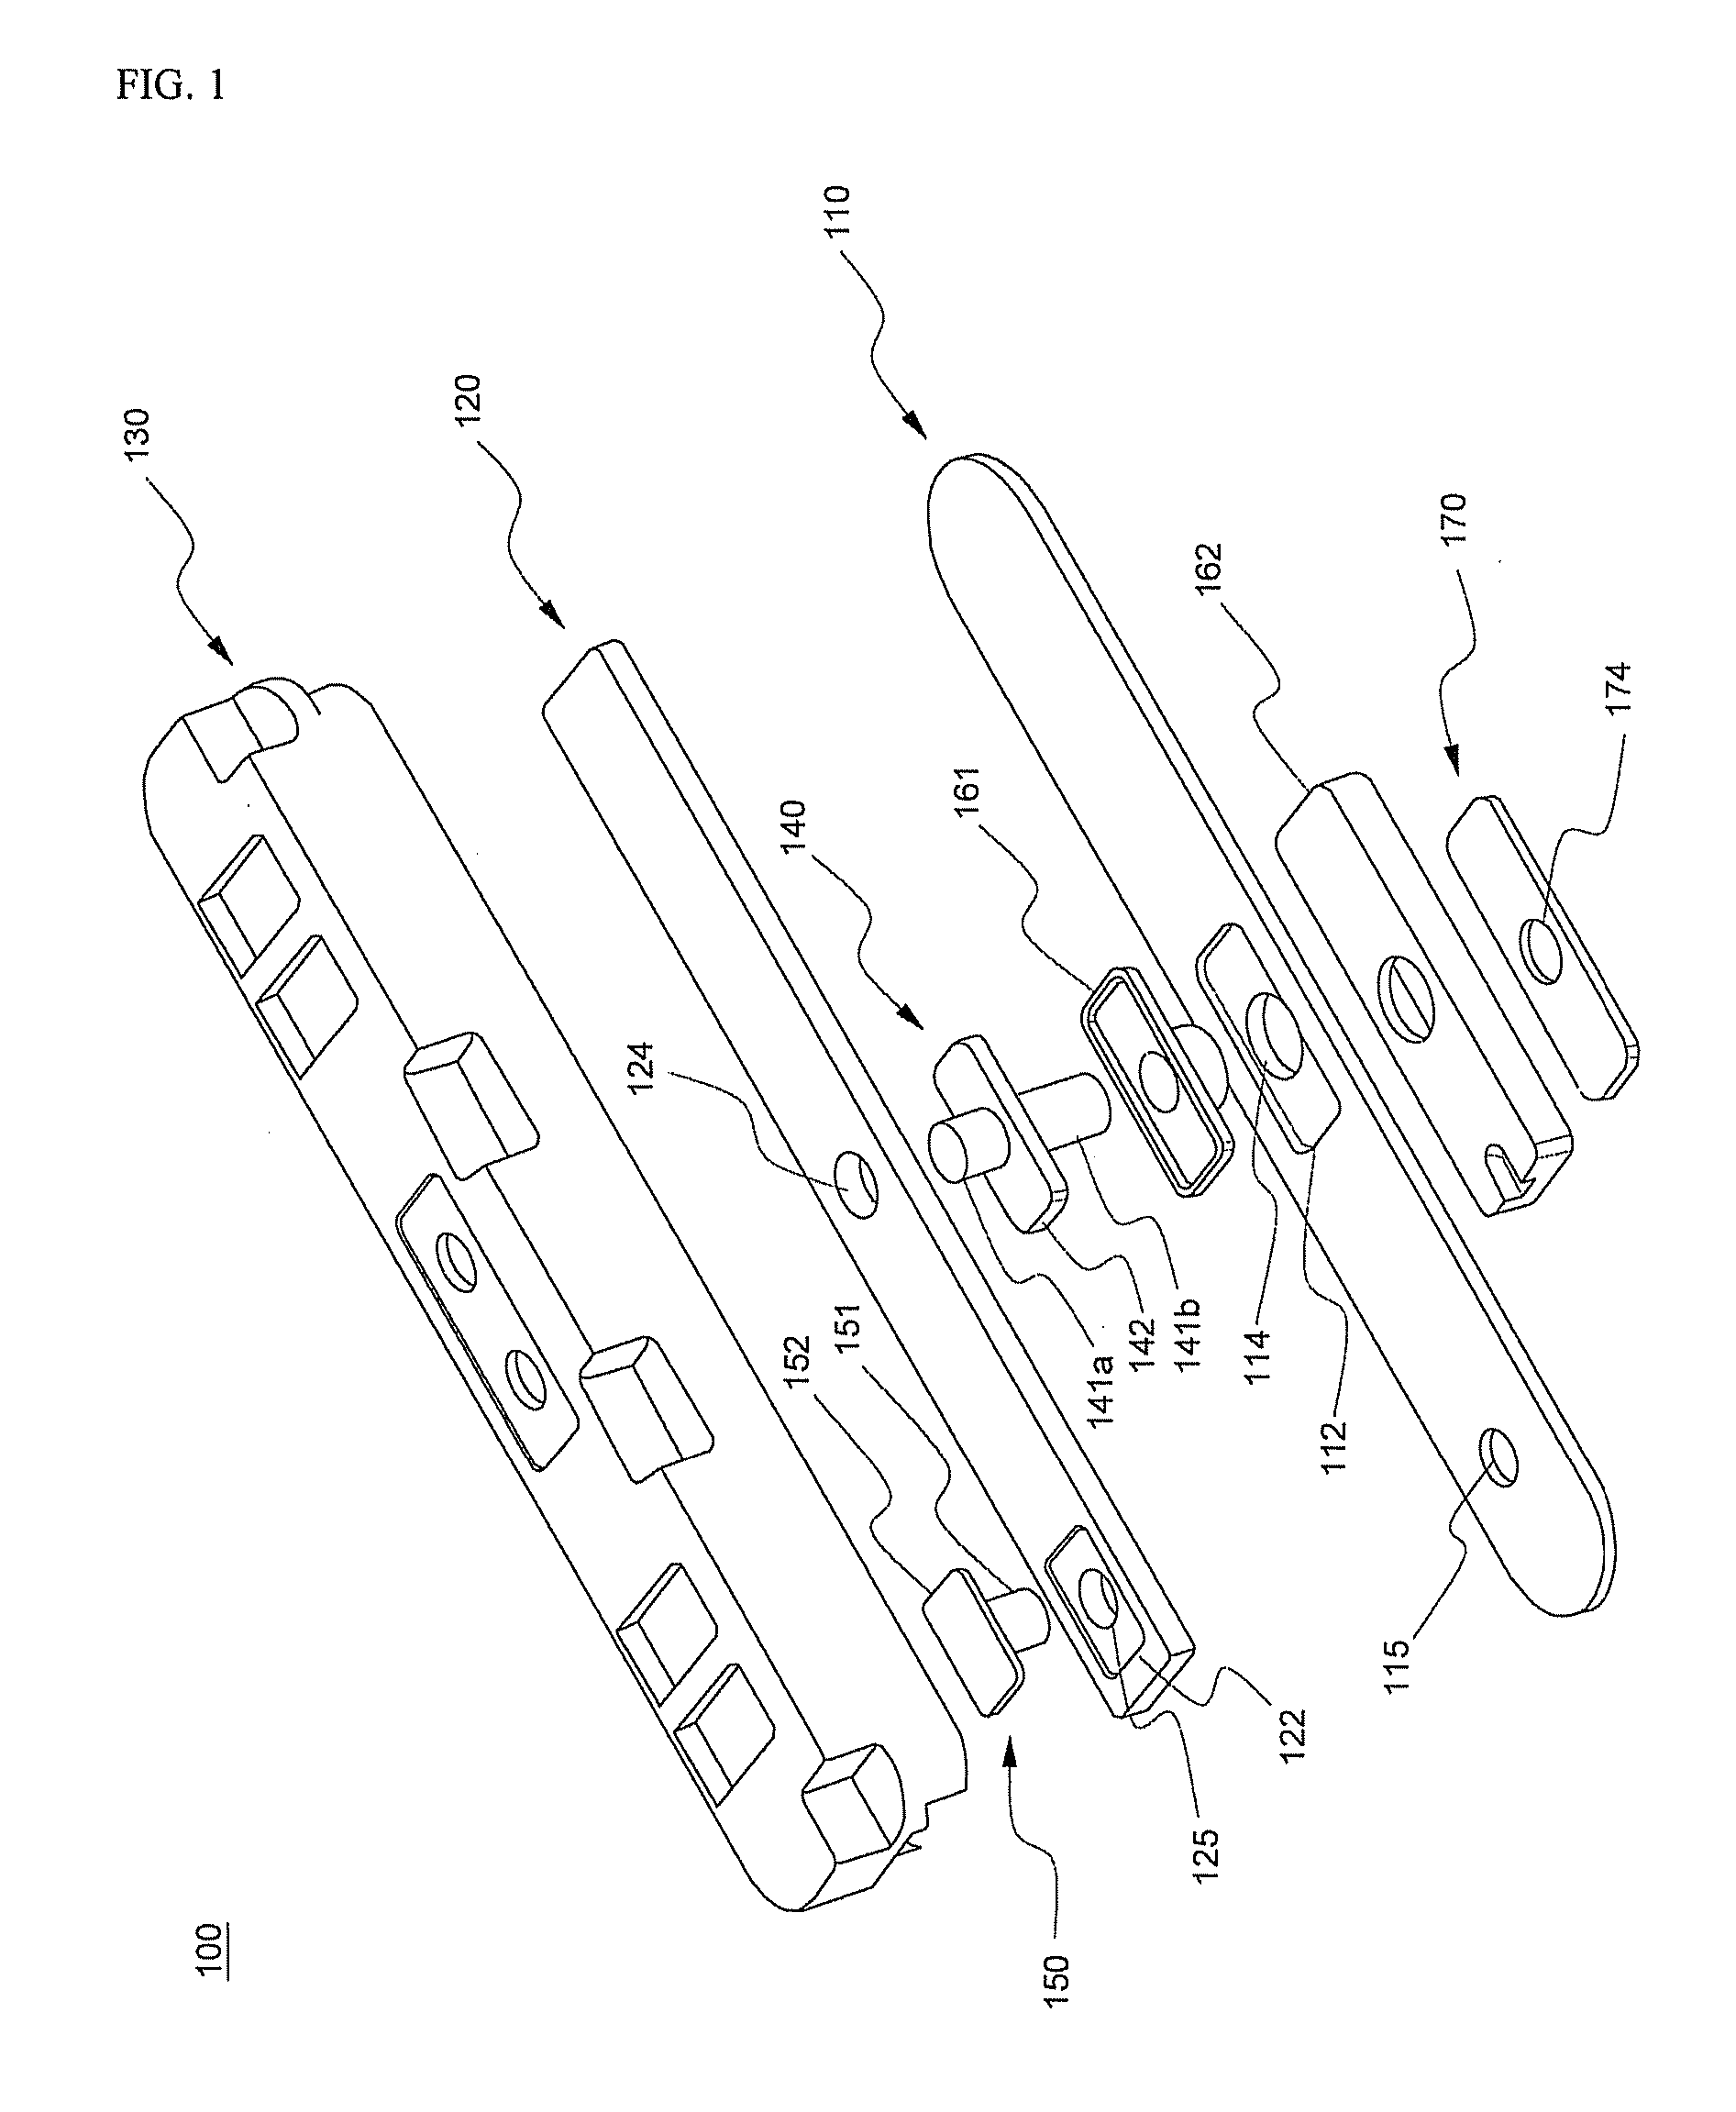 No-welding type battery pack using forced-inserting type rivet